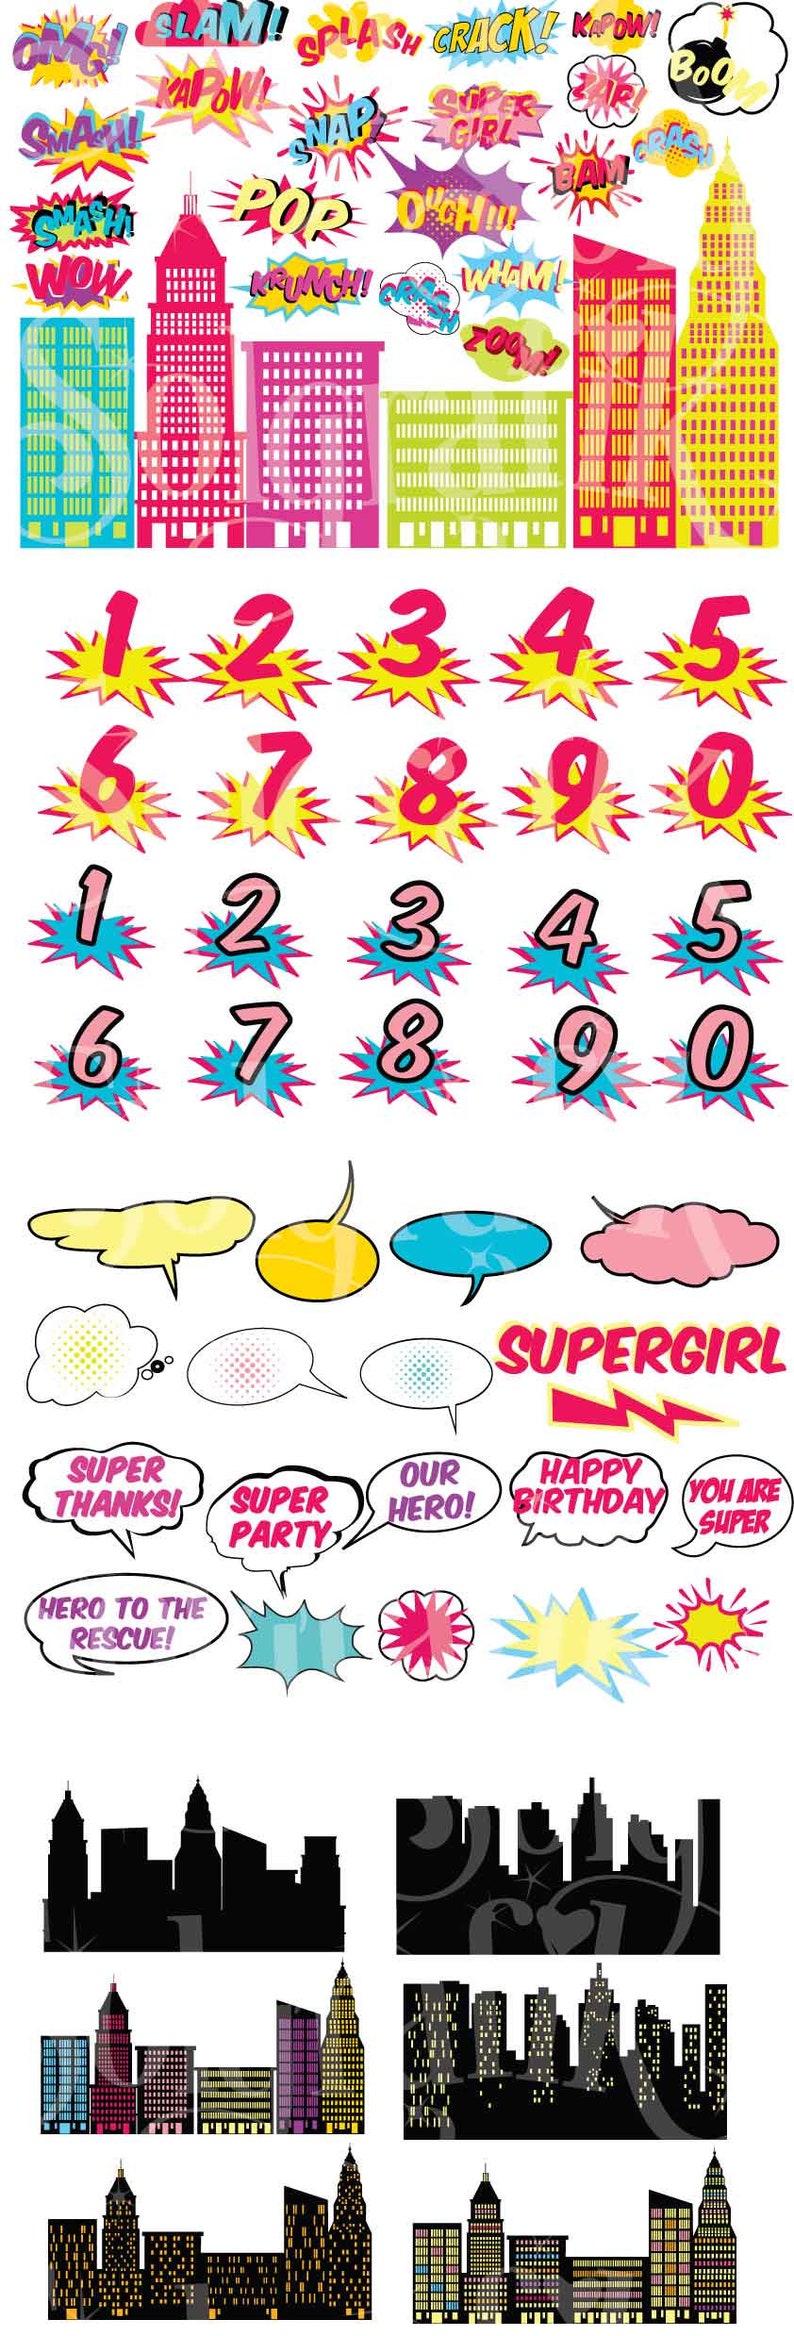 Superhero Girl , Clip Art , Action Words,Comic Sound Effects,SuperHero bubbles,Sounds Sayings, comic book style, Commercial-Personal Use image 2